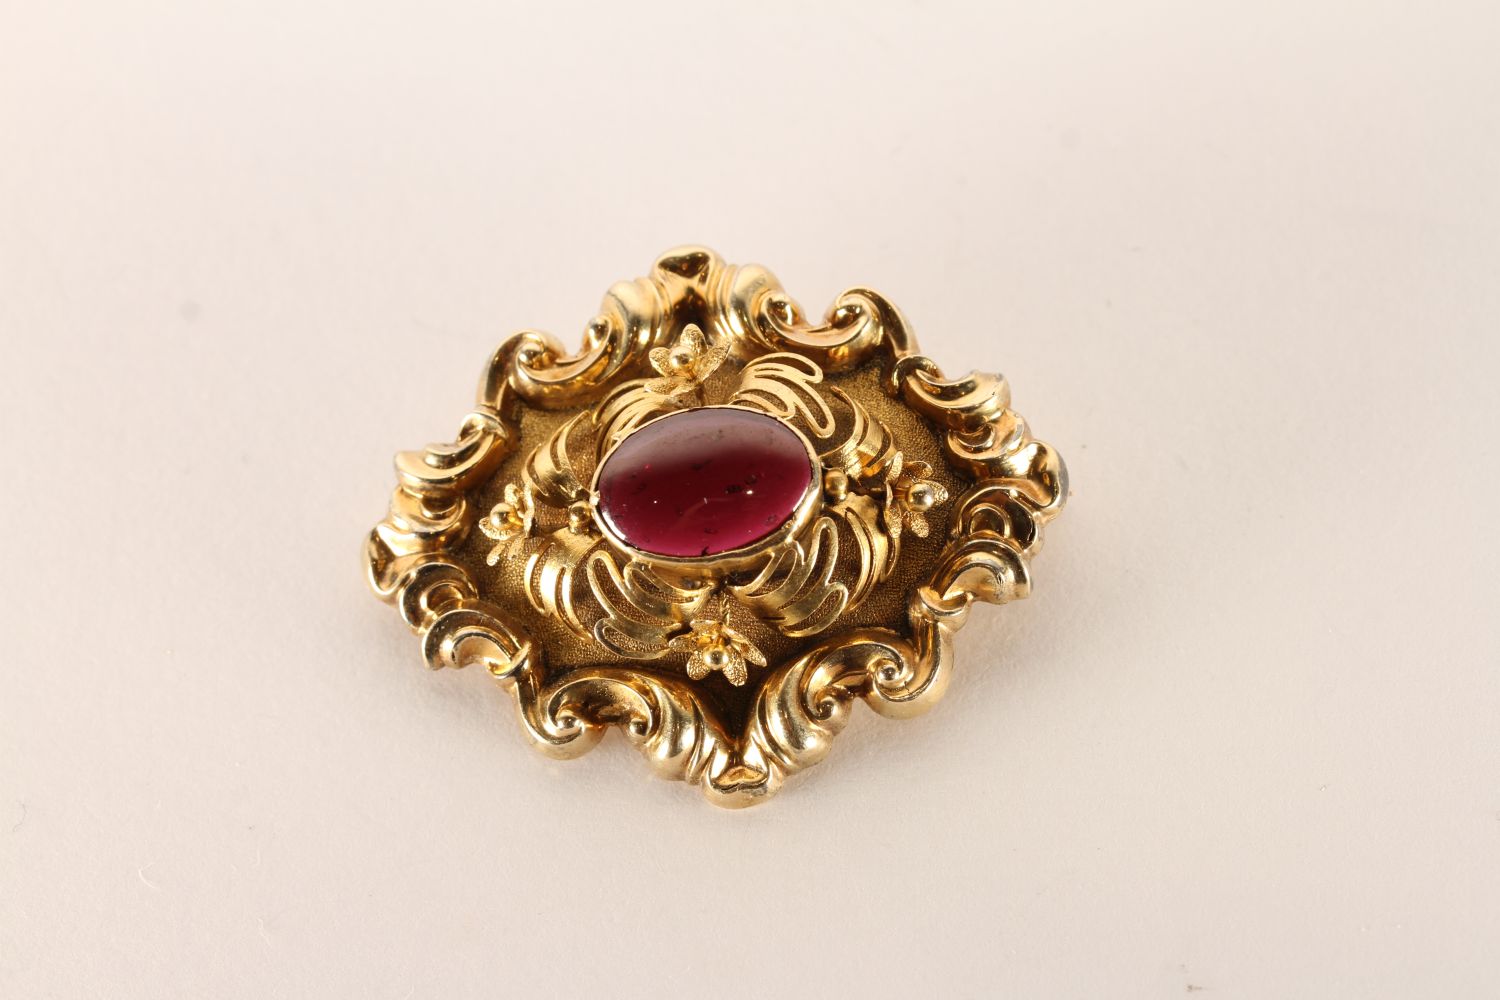 Victorian Brooch, Cabochon garnet centre floral gold work detail, approximately 8.6g gross, tested